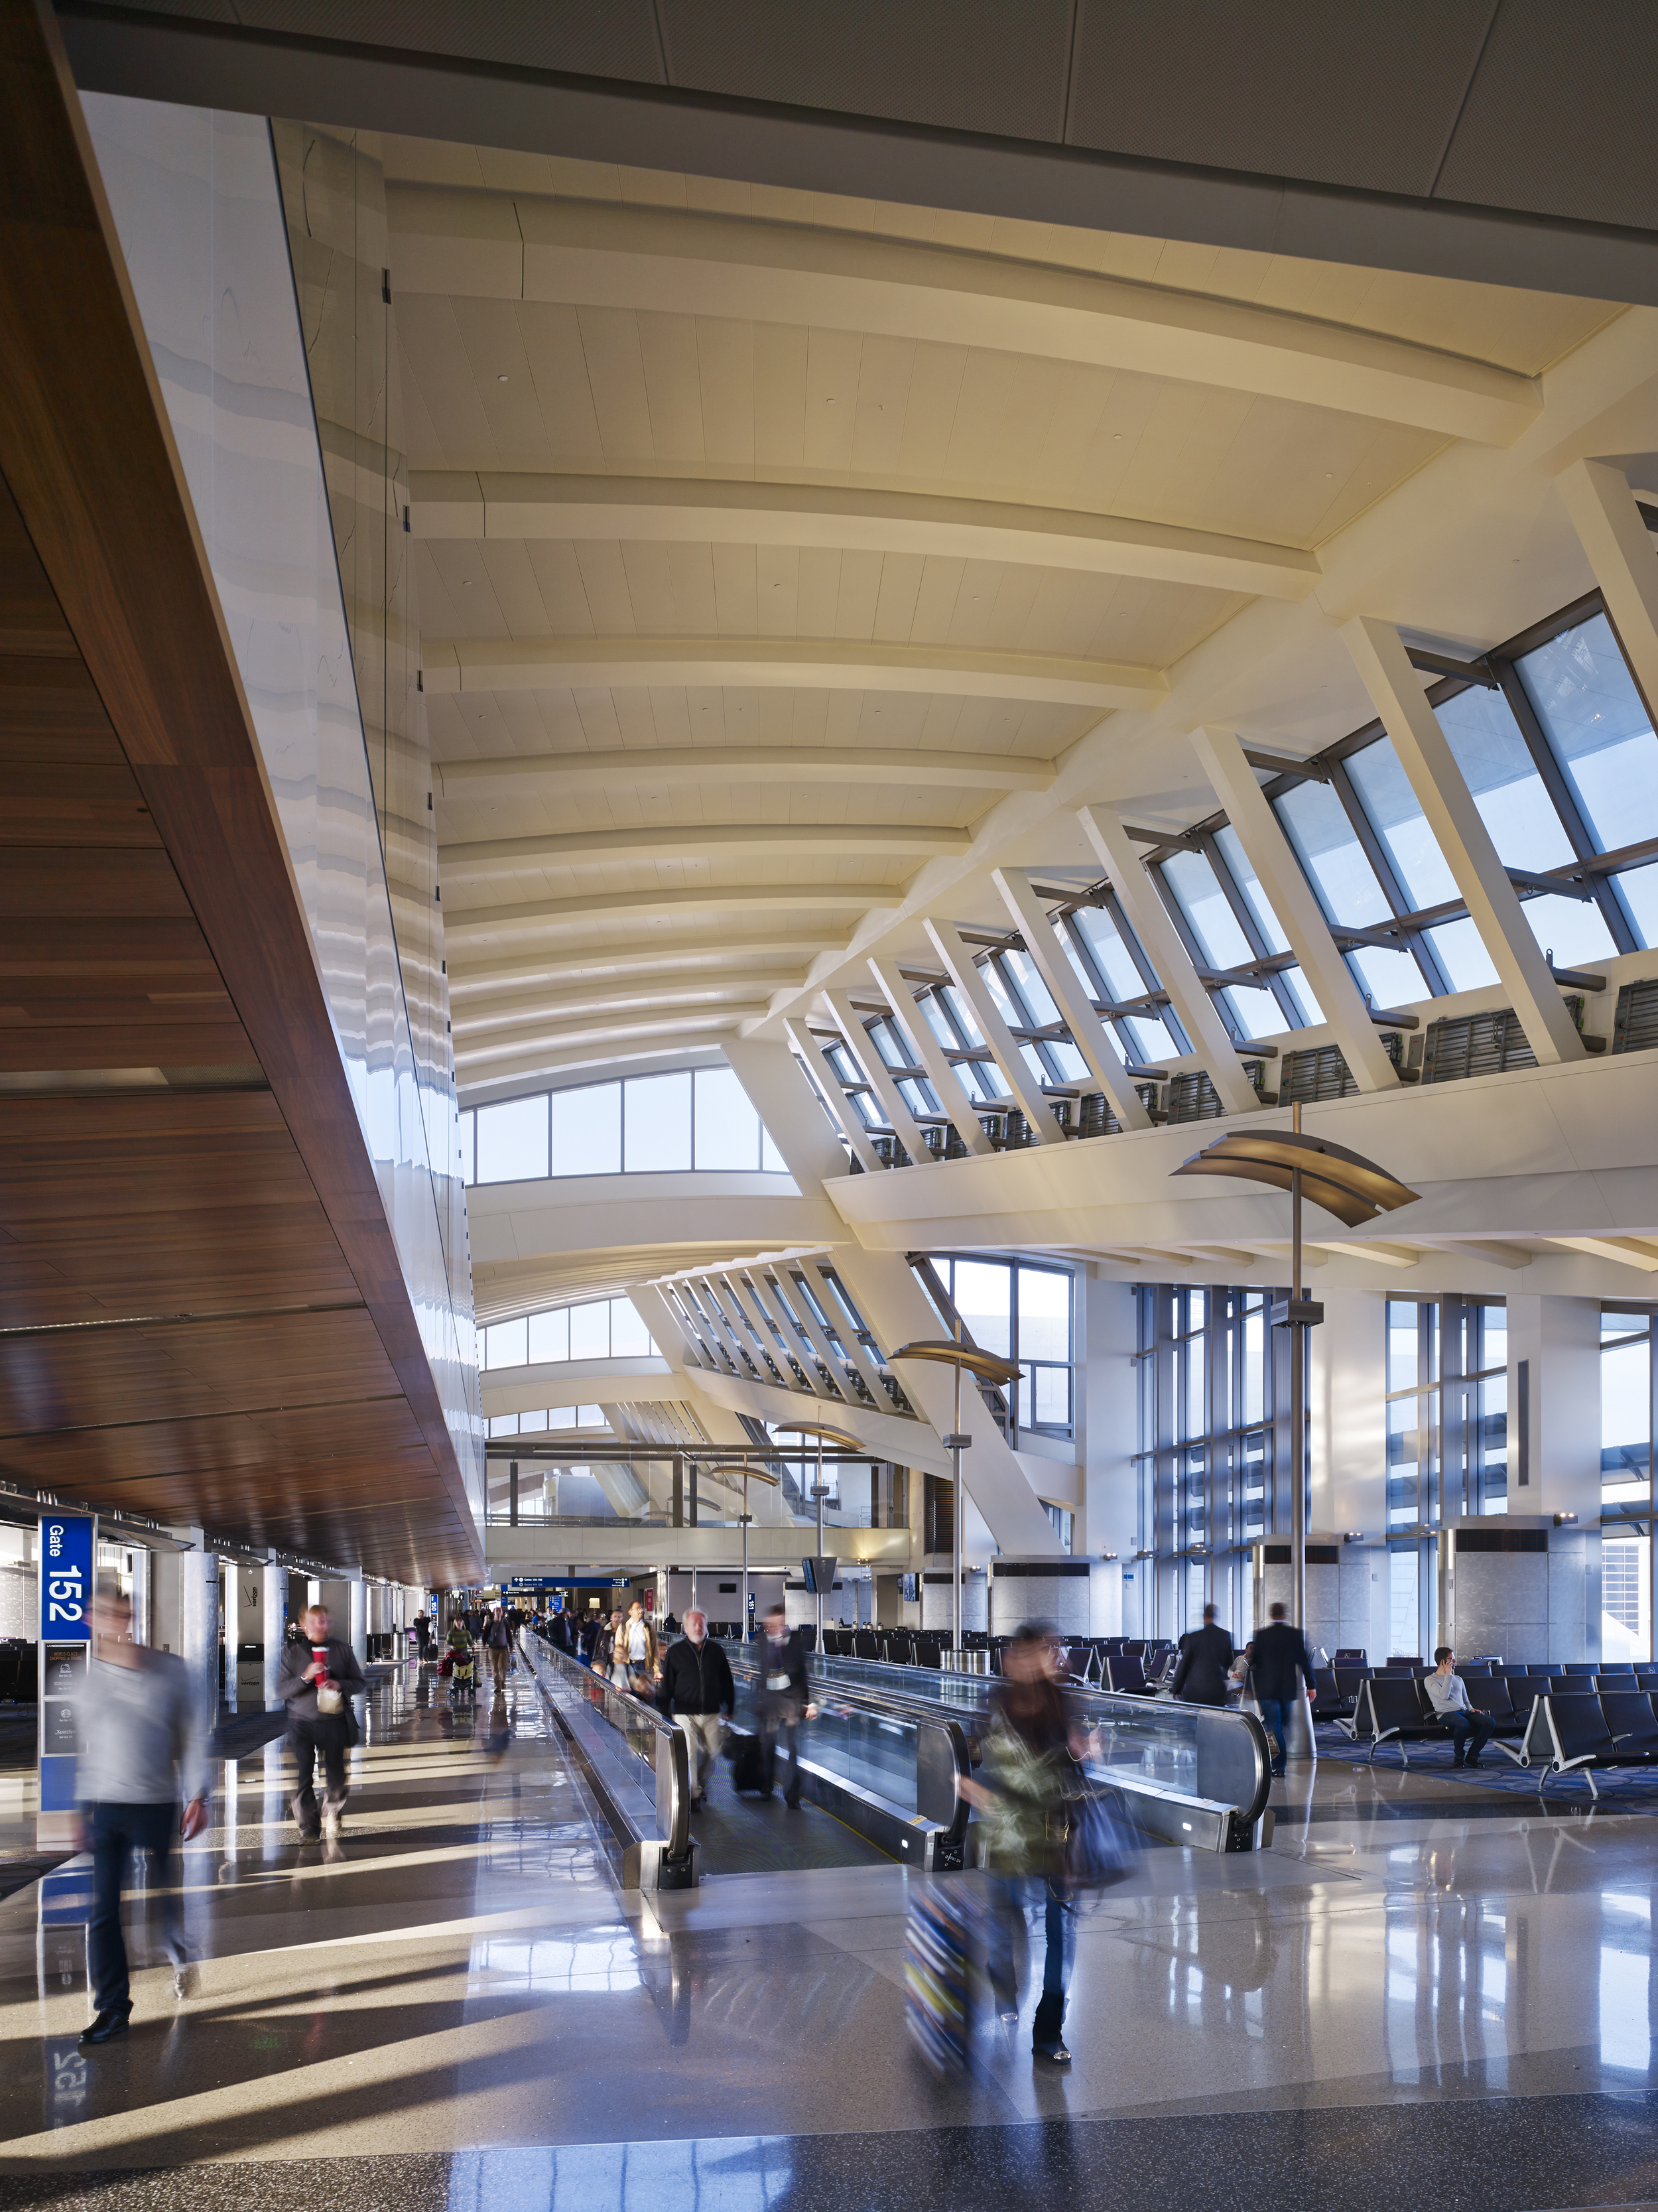  LAX International Terminal  Fentress Architects  Los Angeles, CA      View Full Project  